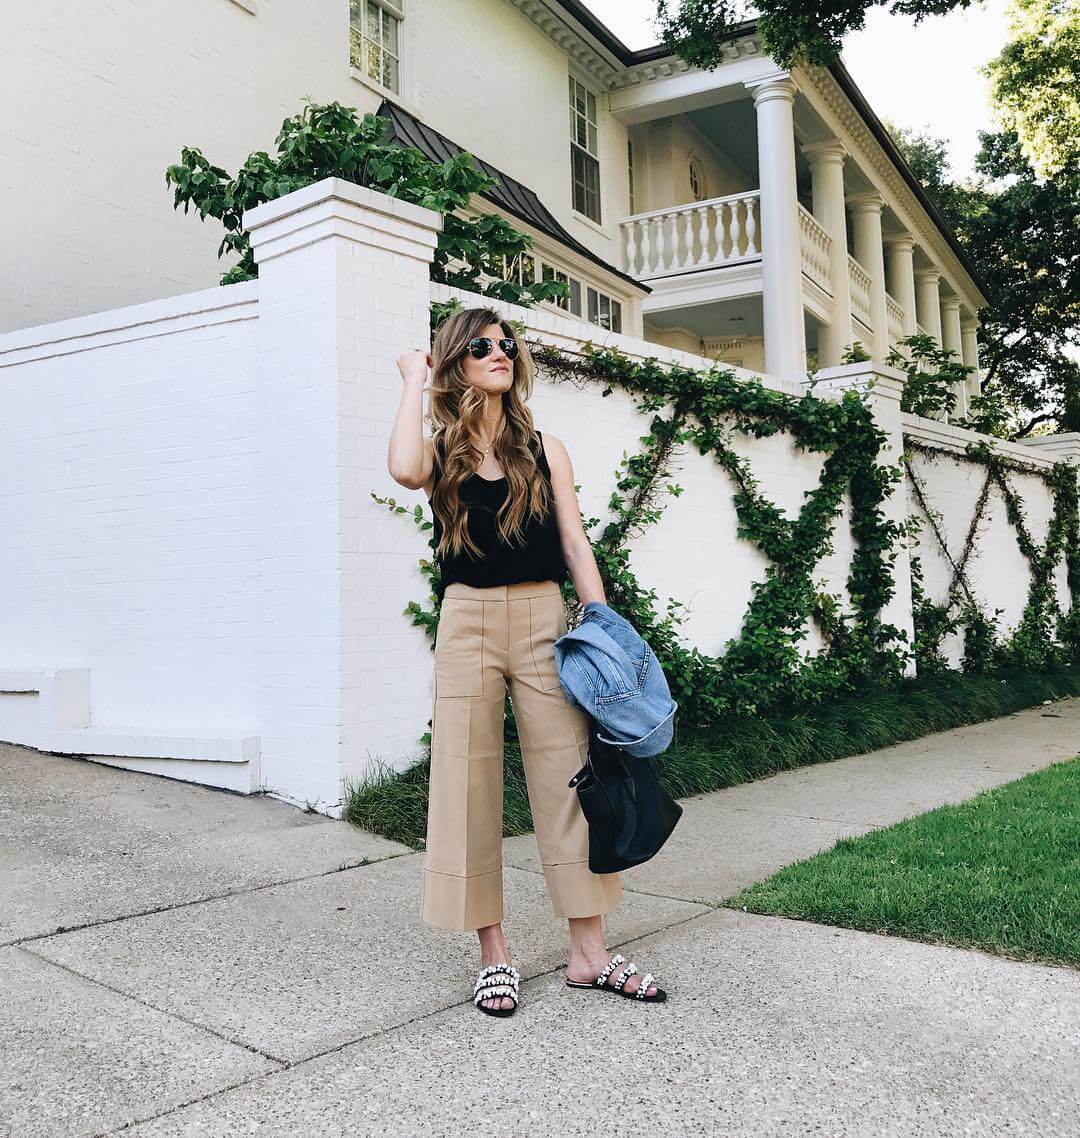 brighton keller wearing tan culottes with black tank and pearl slides 